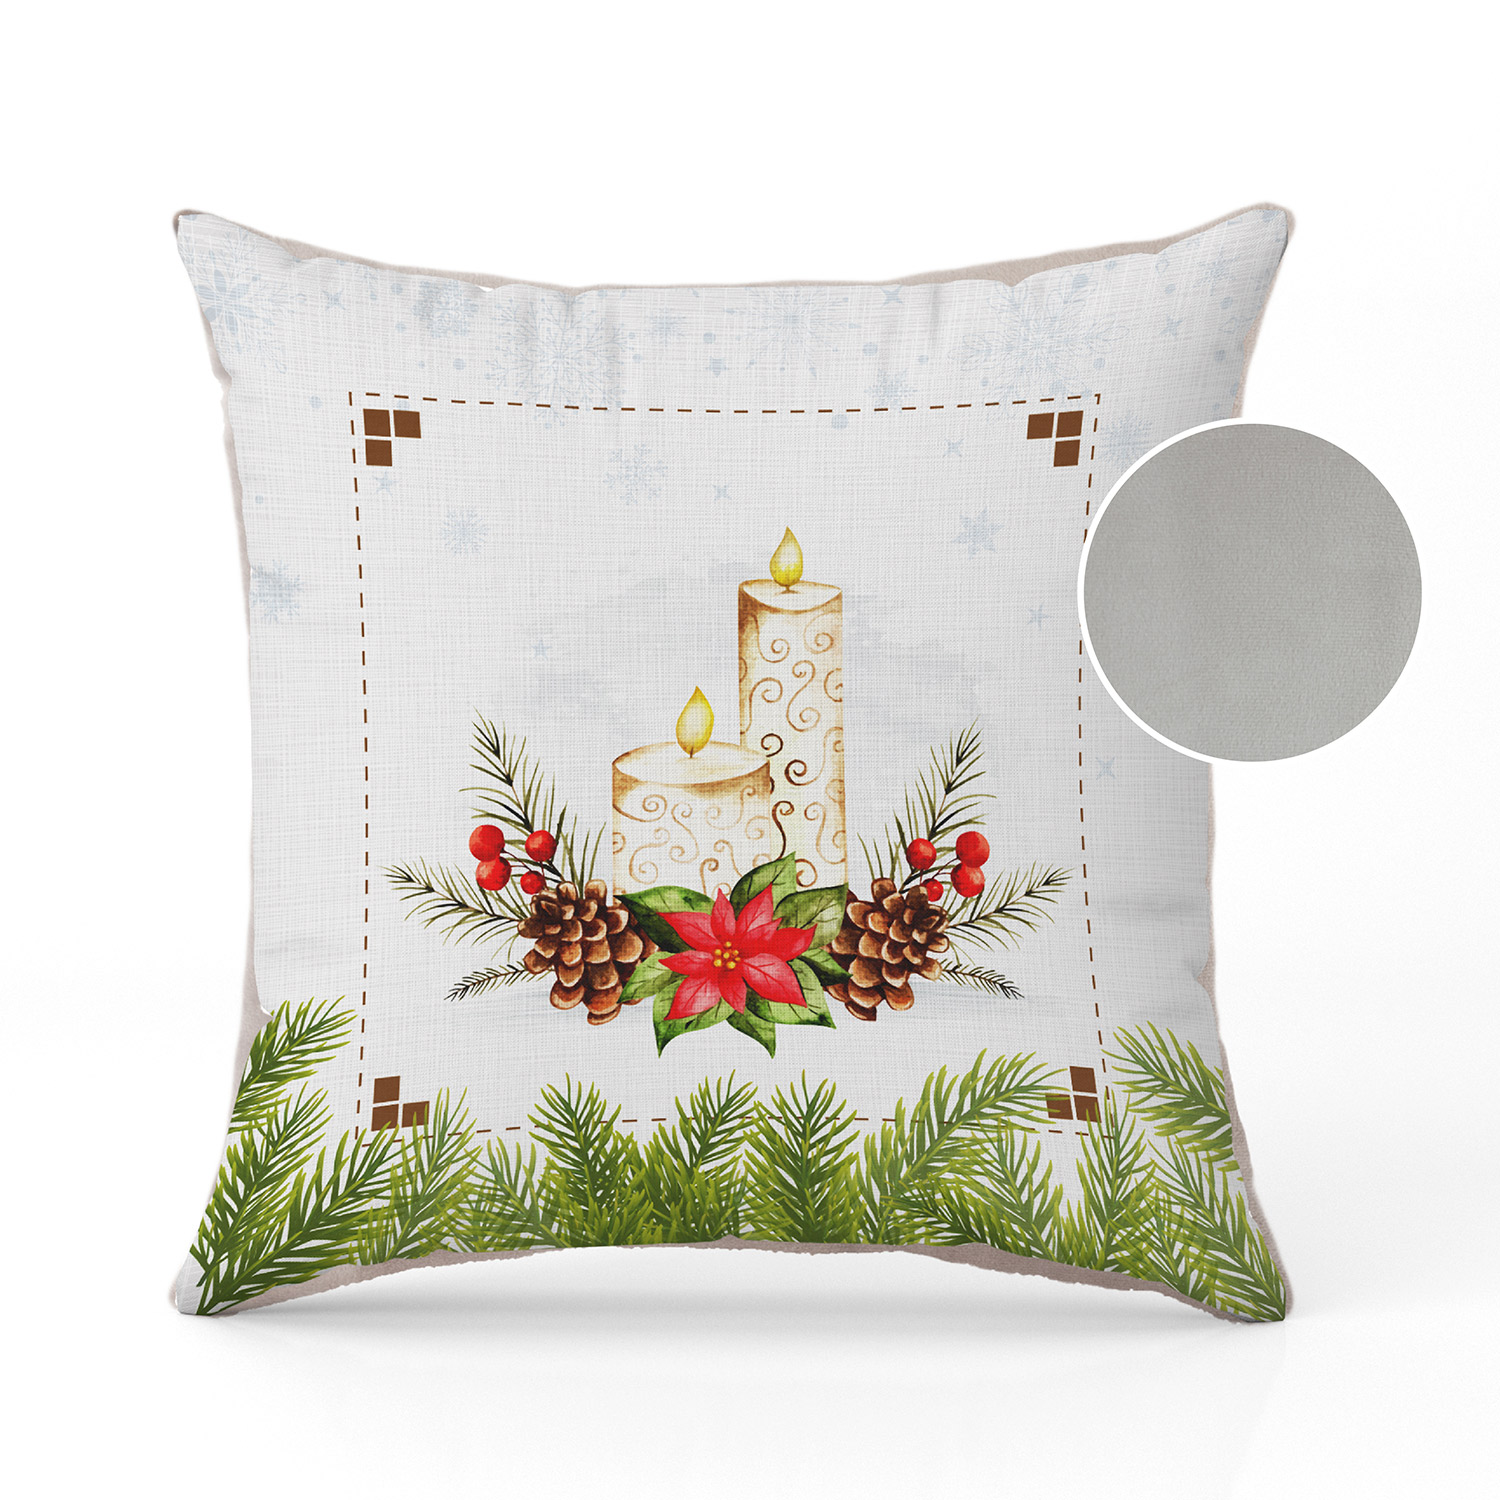 Christmas pillow with candle